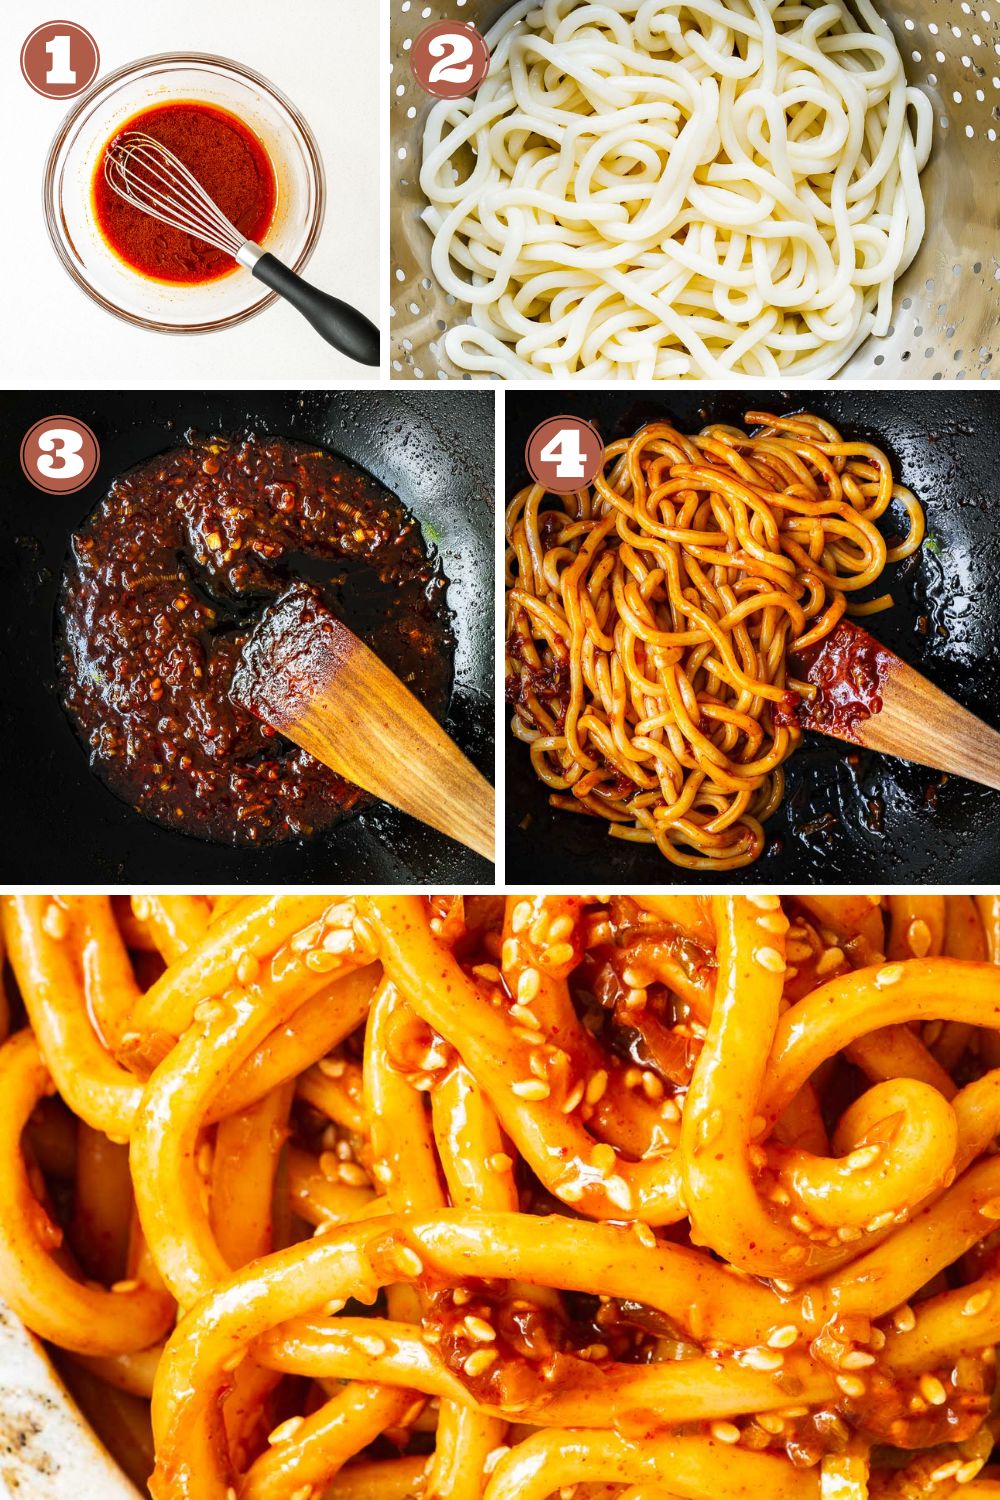 How to make spicy Korean noodles in four simple steps: mix sauce ingredients, cook udon noodles, cook gochujang noodle sauce, then add the cooked noodles.